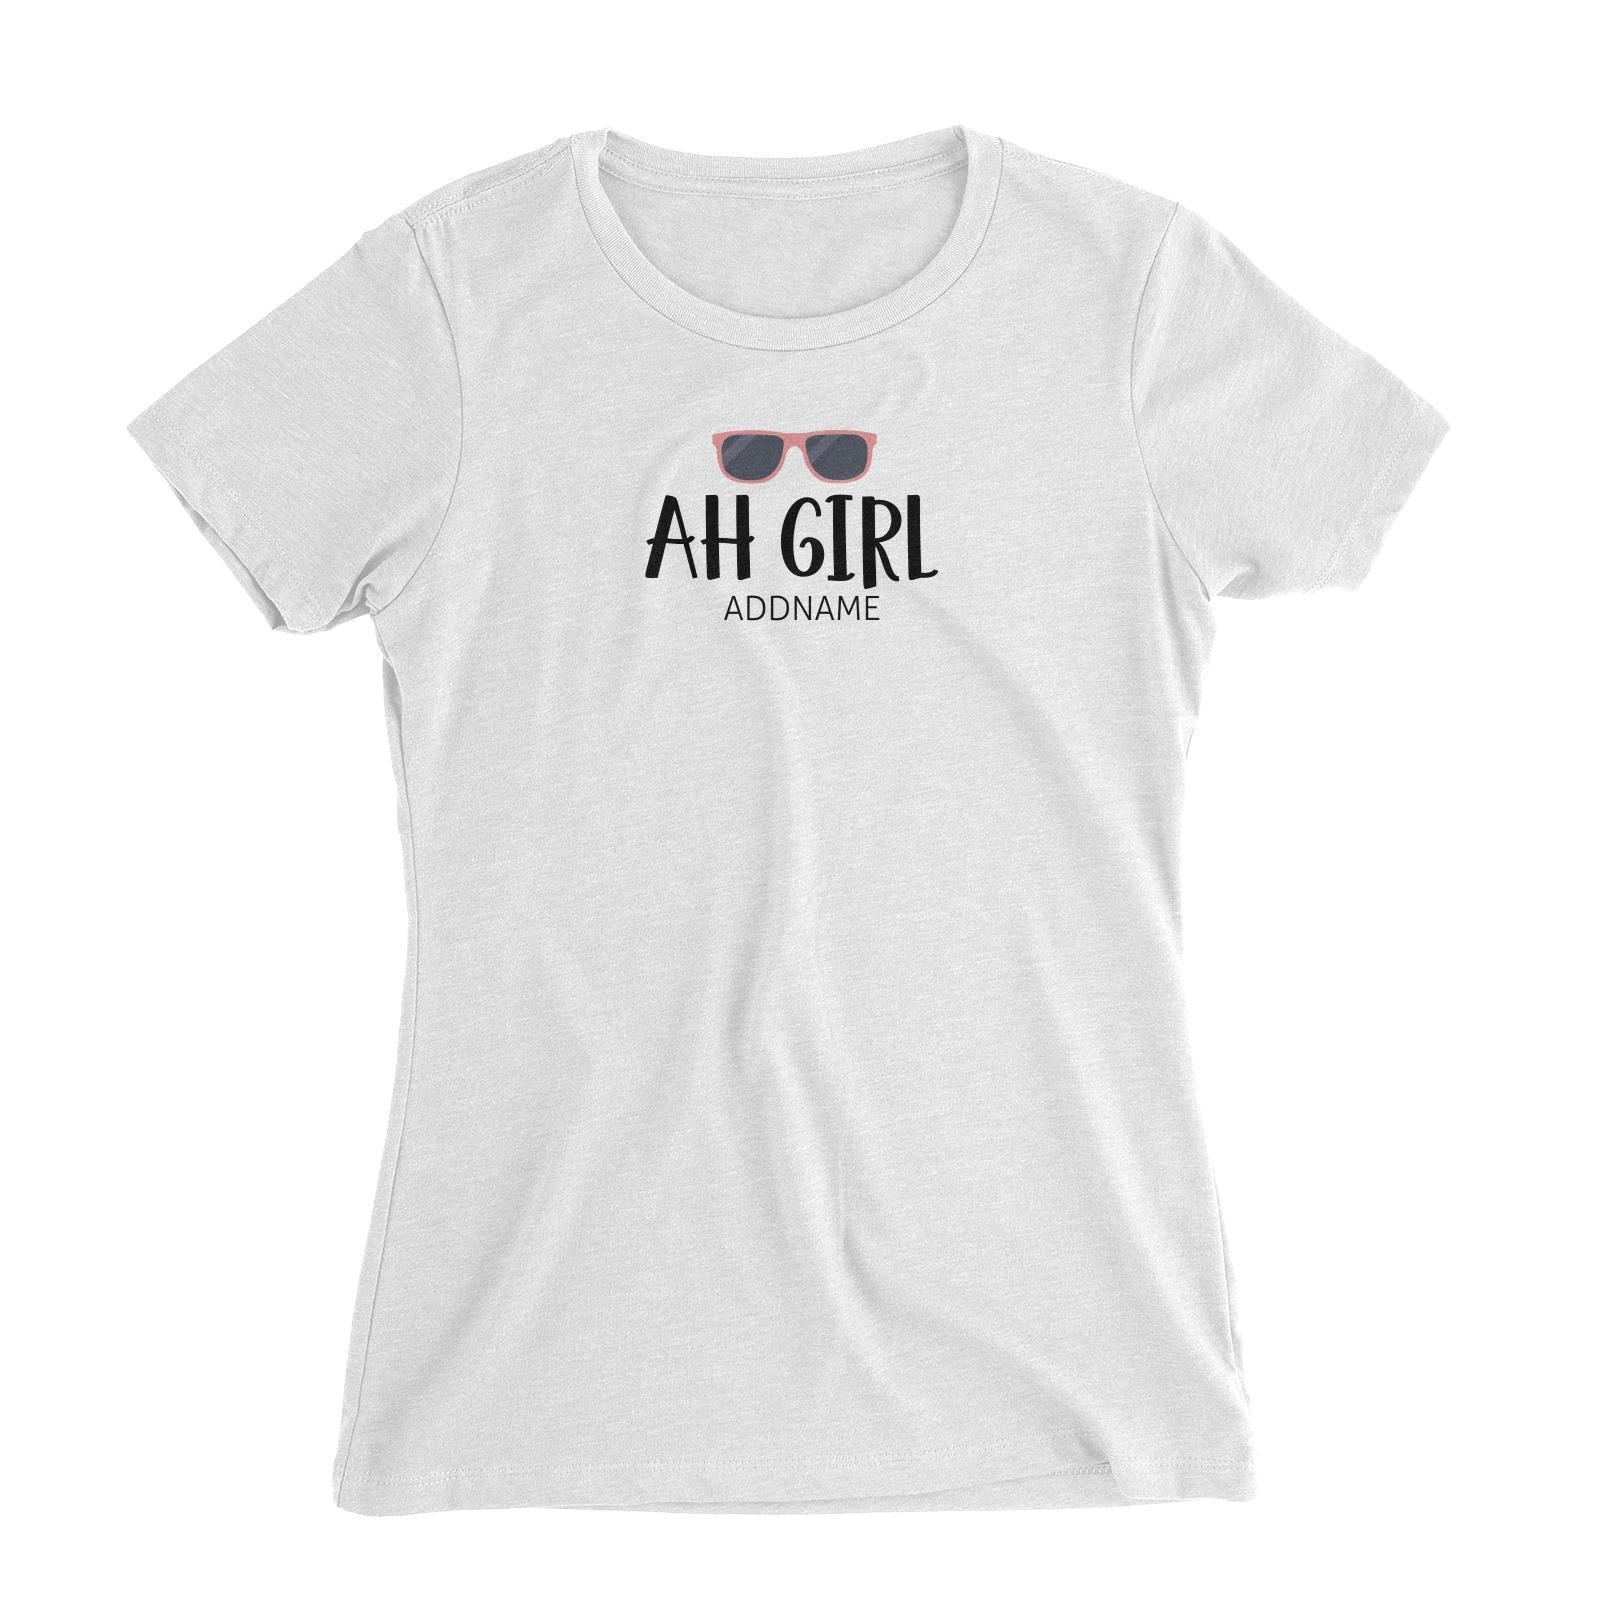 Ah Girl with Sunnies Women's Slim Fit T-Shirt